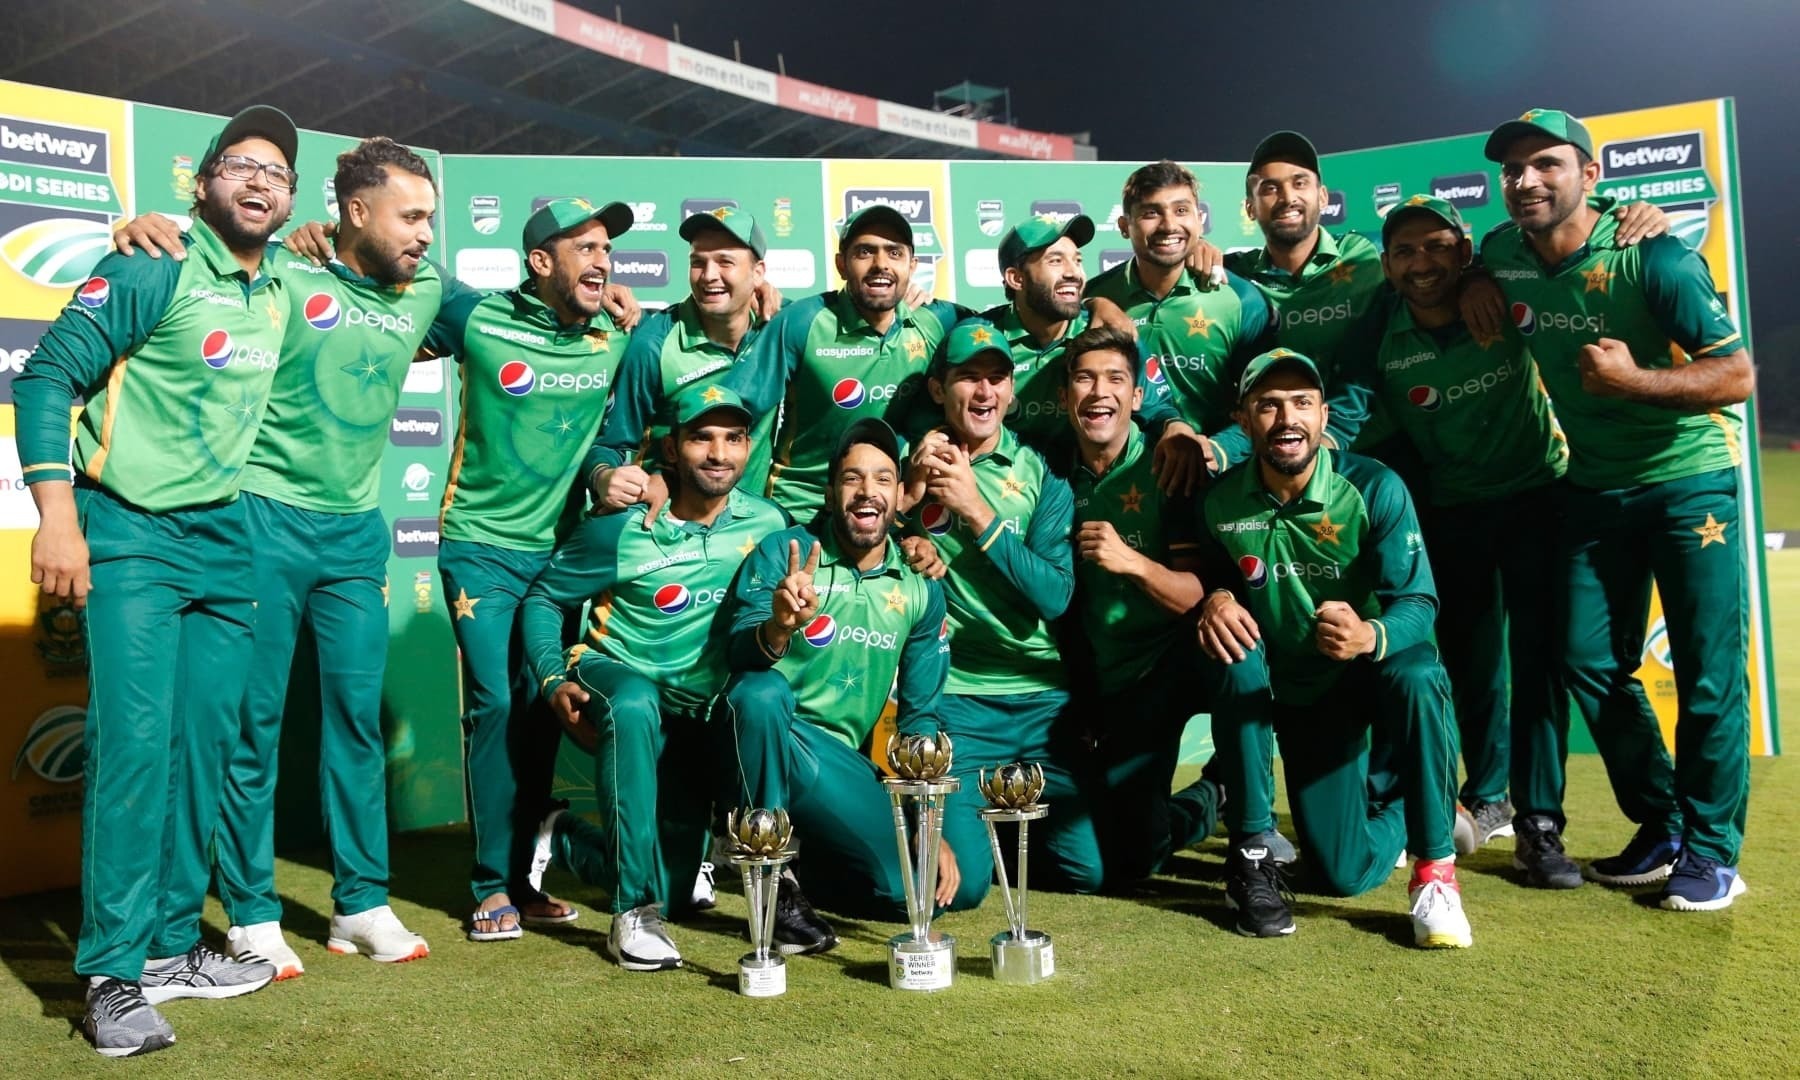 PCB released the details of the full international cricket season covering the next 12 months